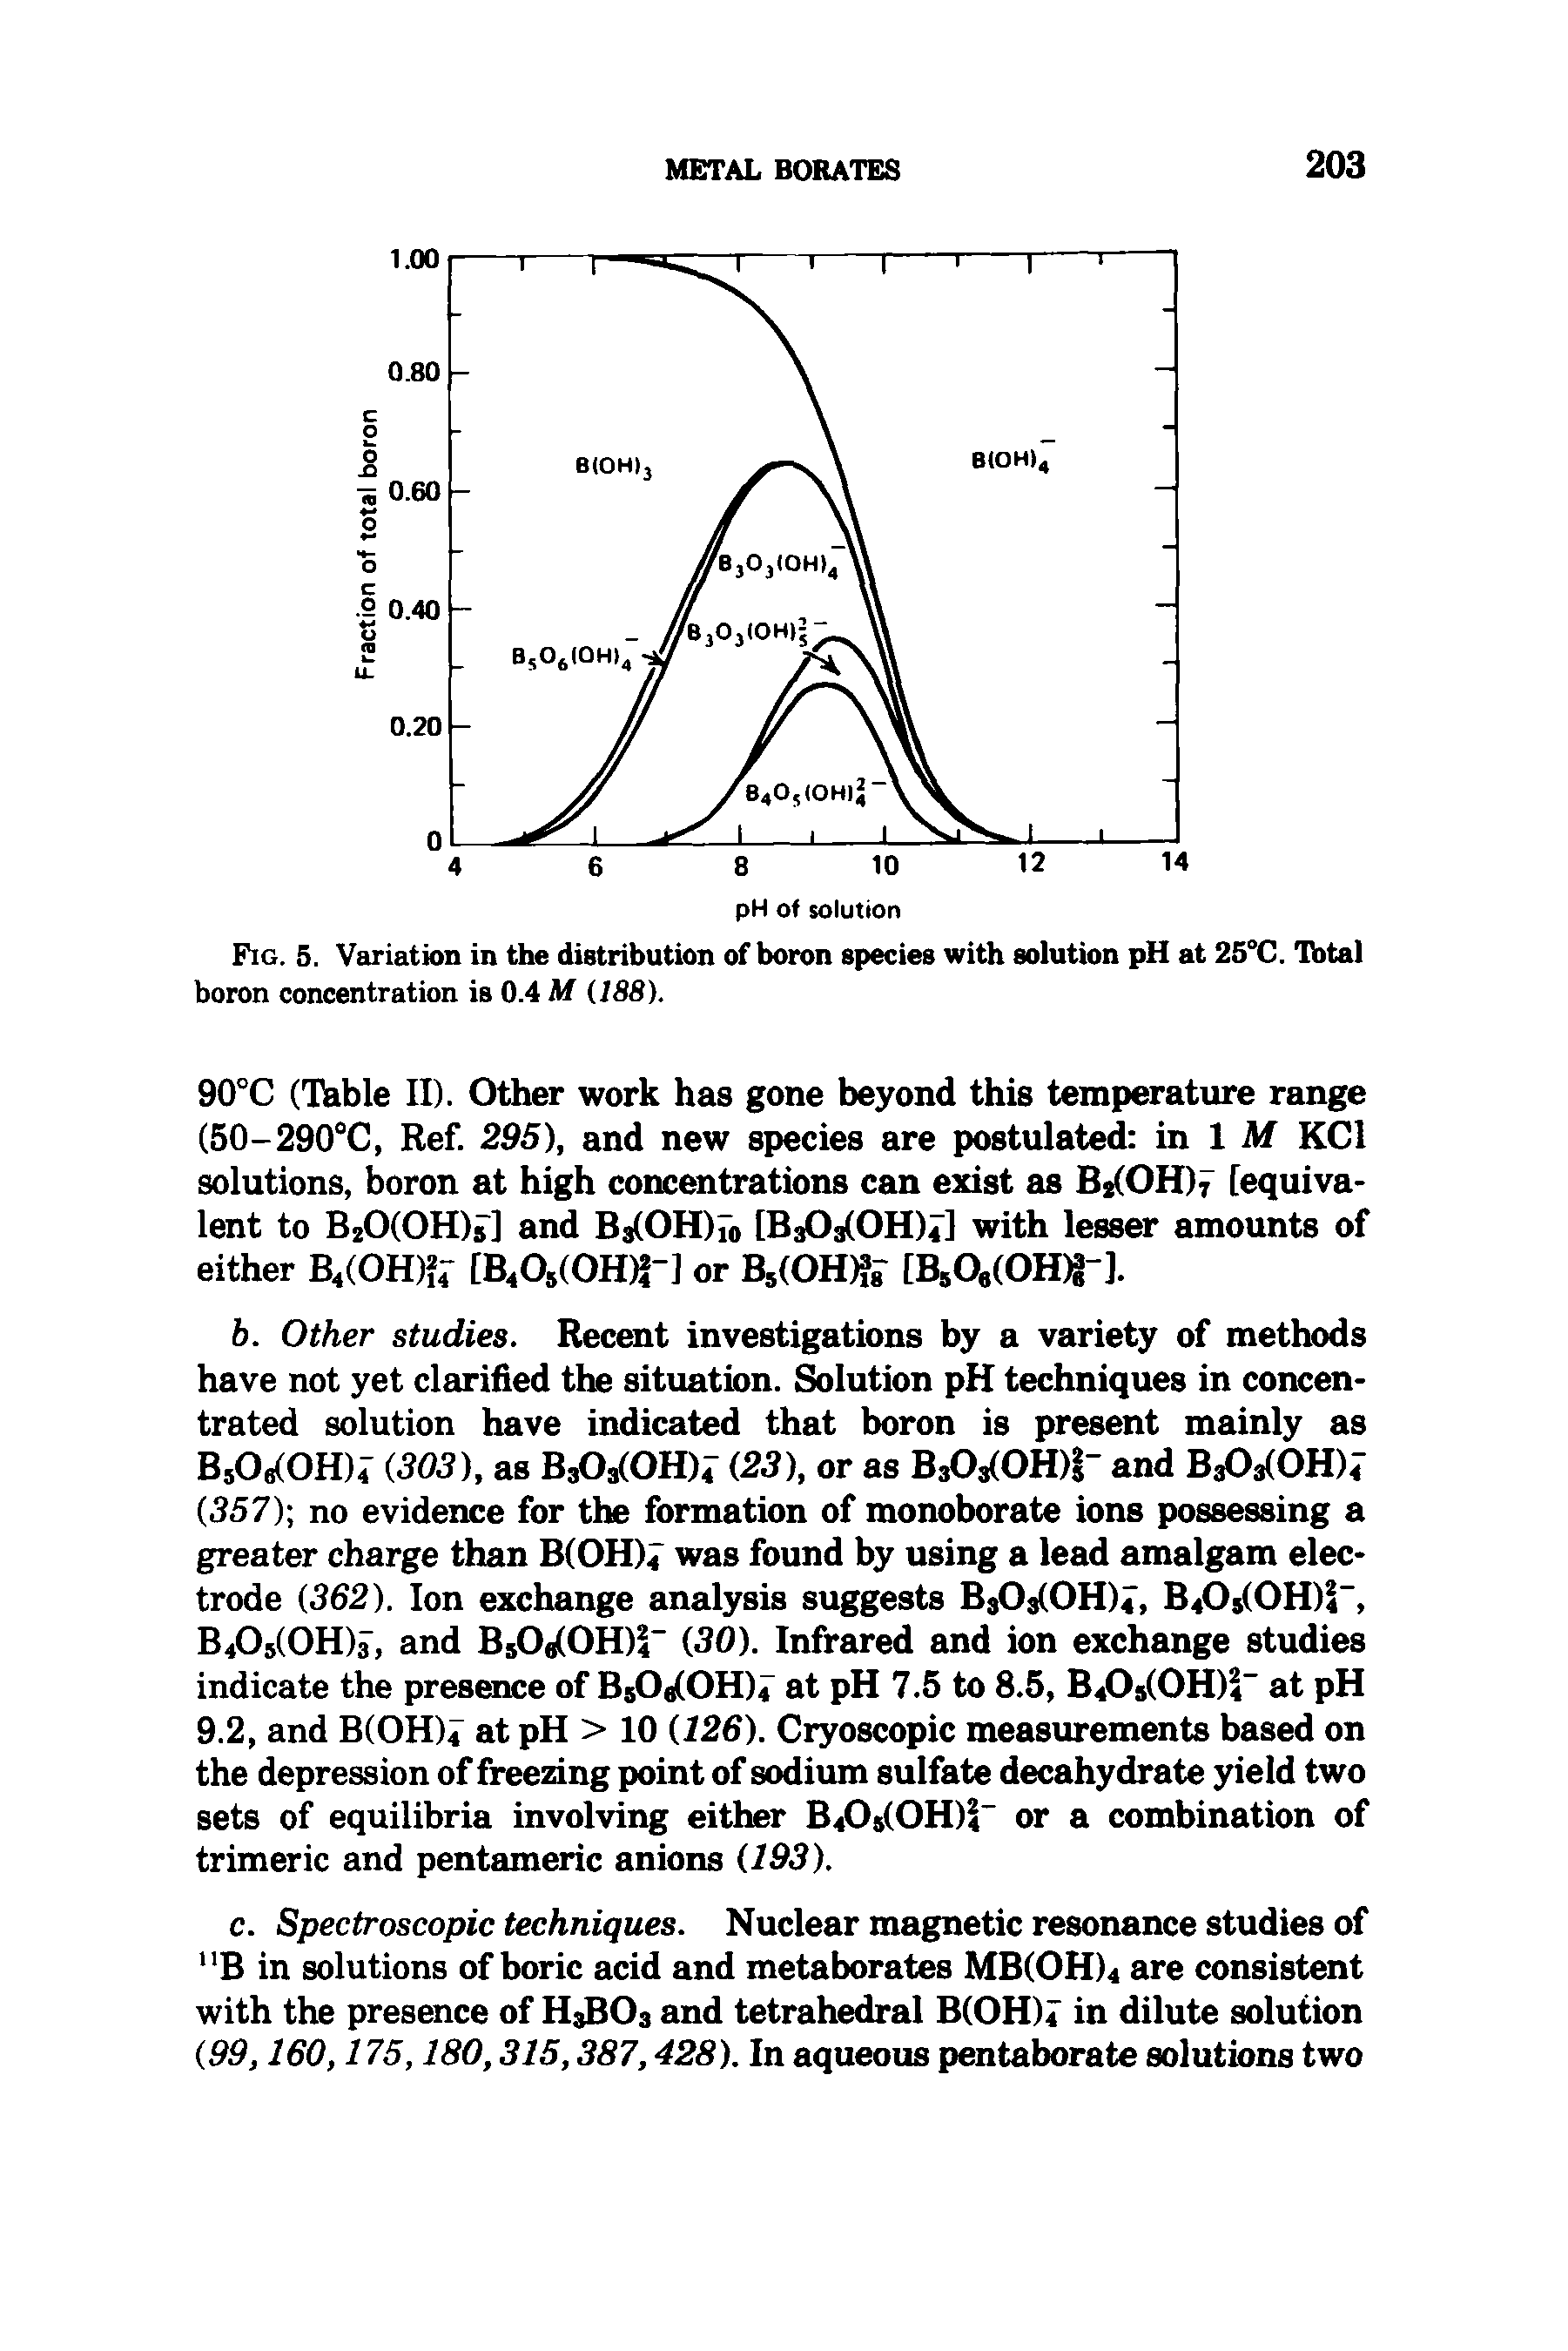 Fig. 5. Variation in the distribution of boron species with solution pH at 25°C. Total boron concentration is 0.4 M (188).